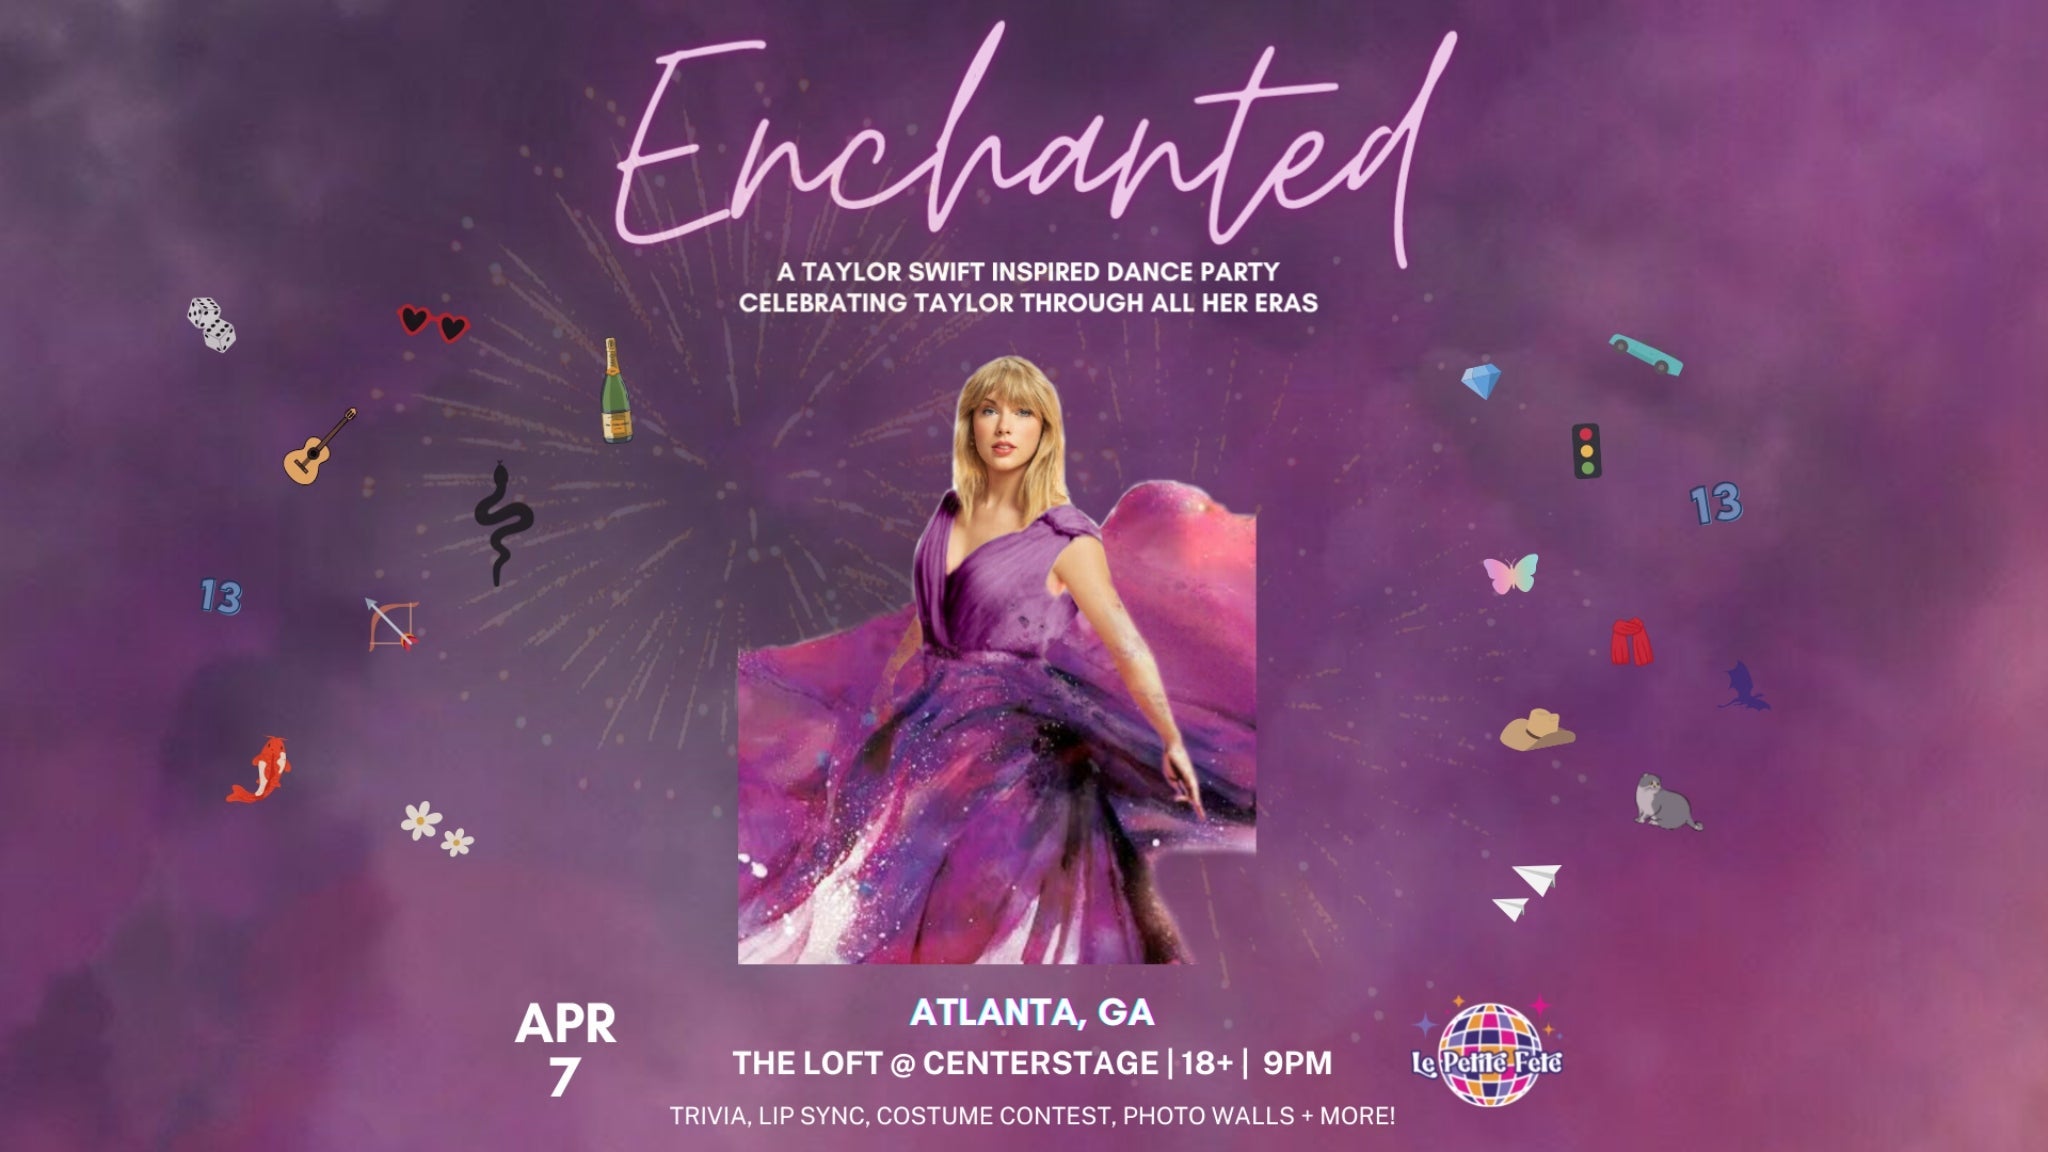 Enchanted - A Taylor Swift Inspired Dance Party